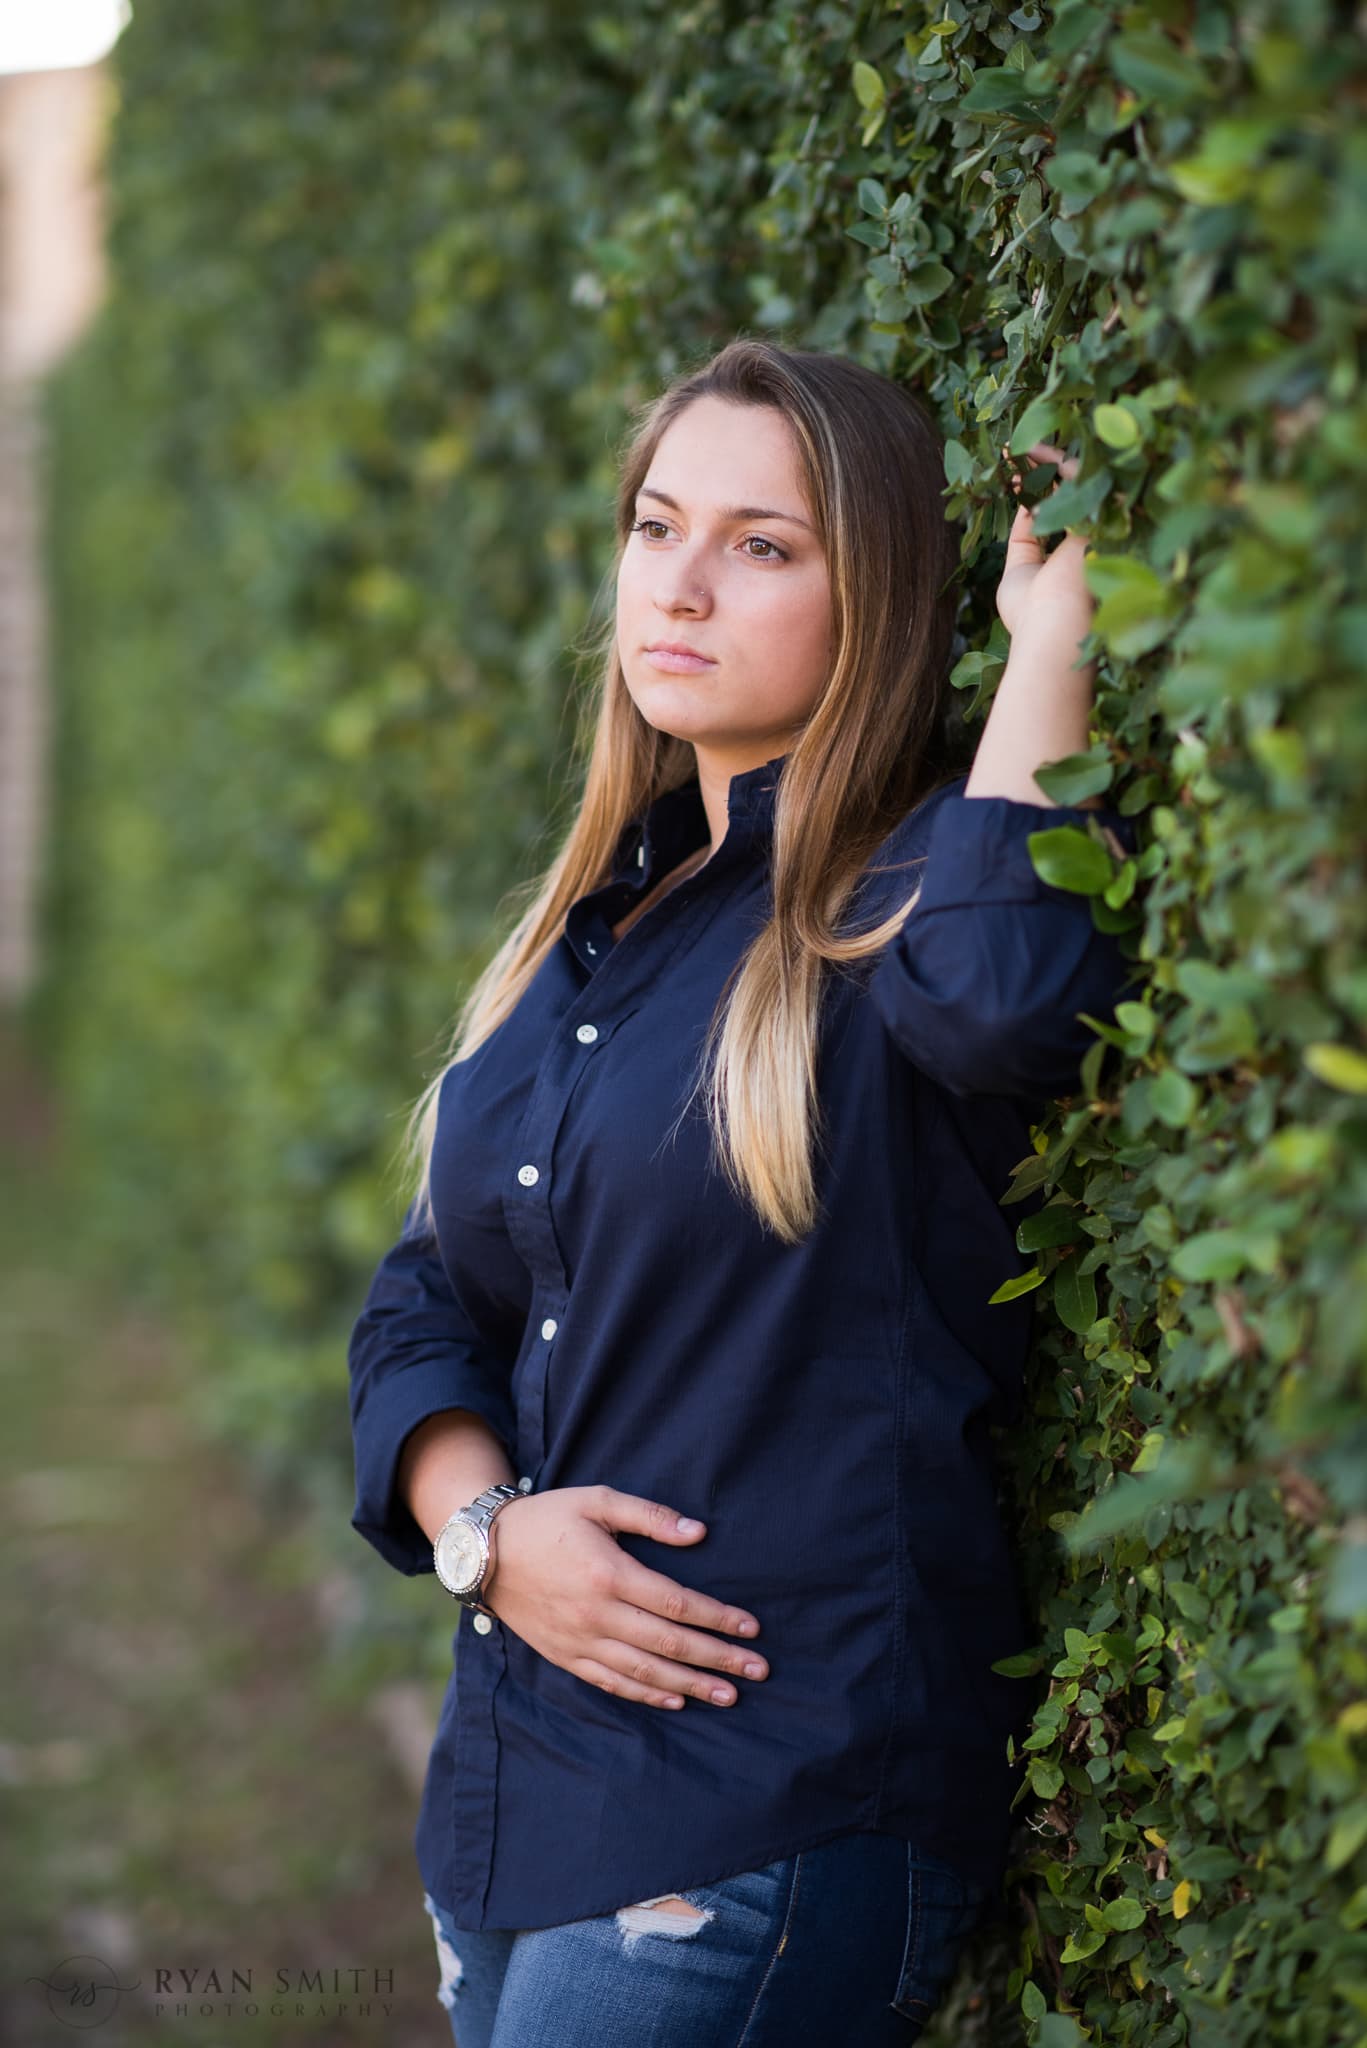 Senior portrait by the ivy covered wall - Atalaya Castle